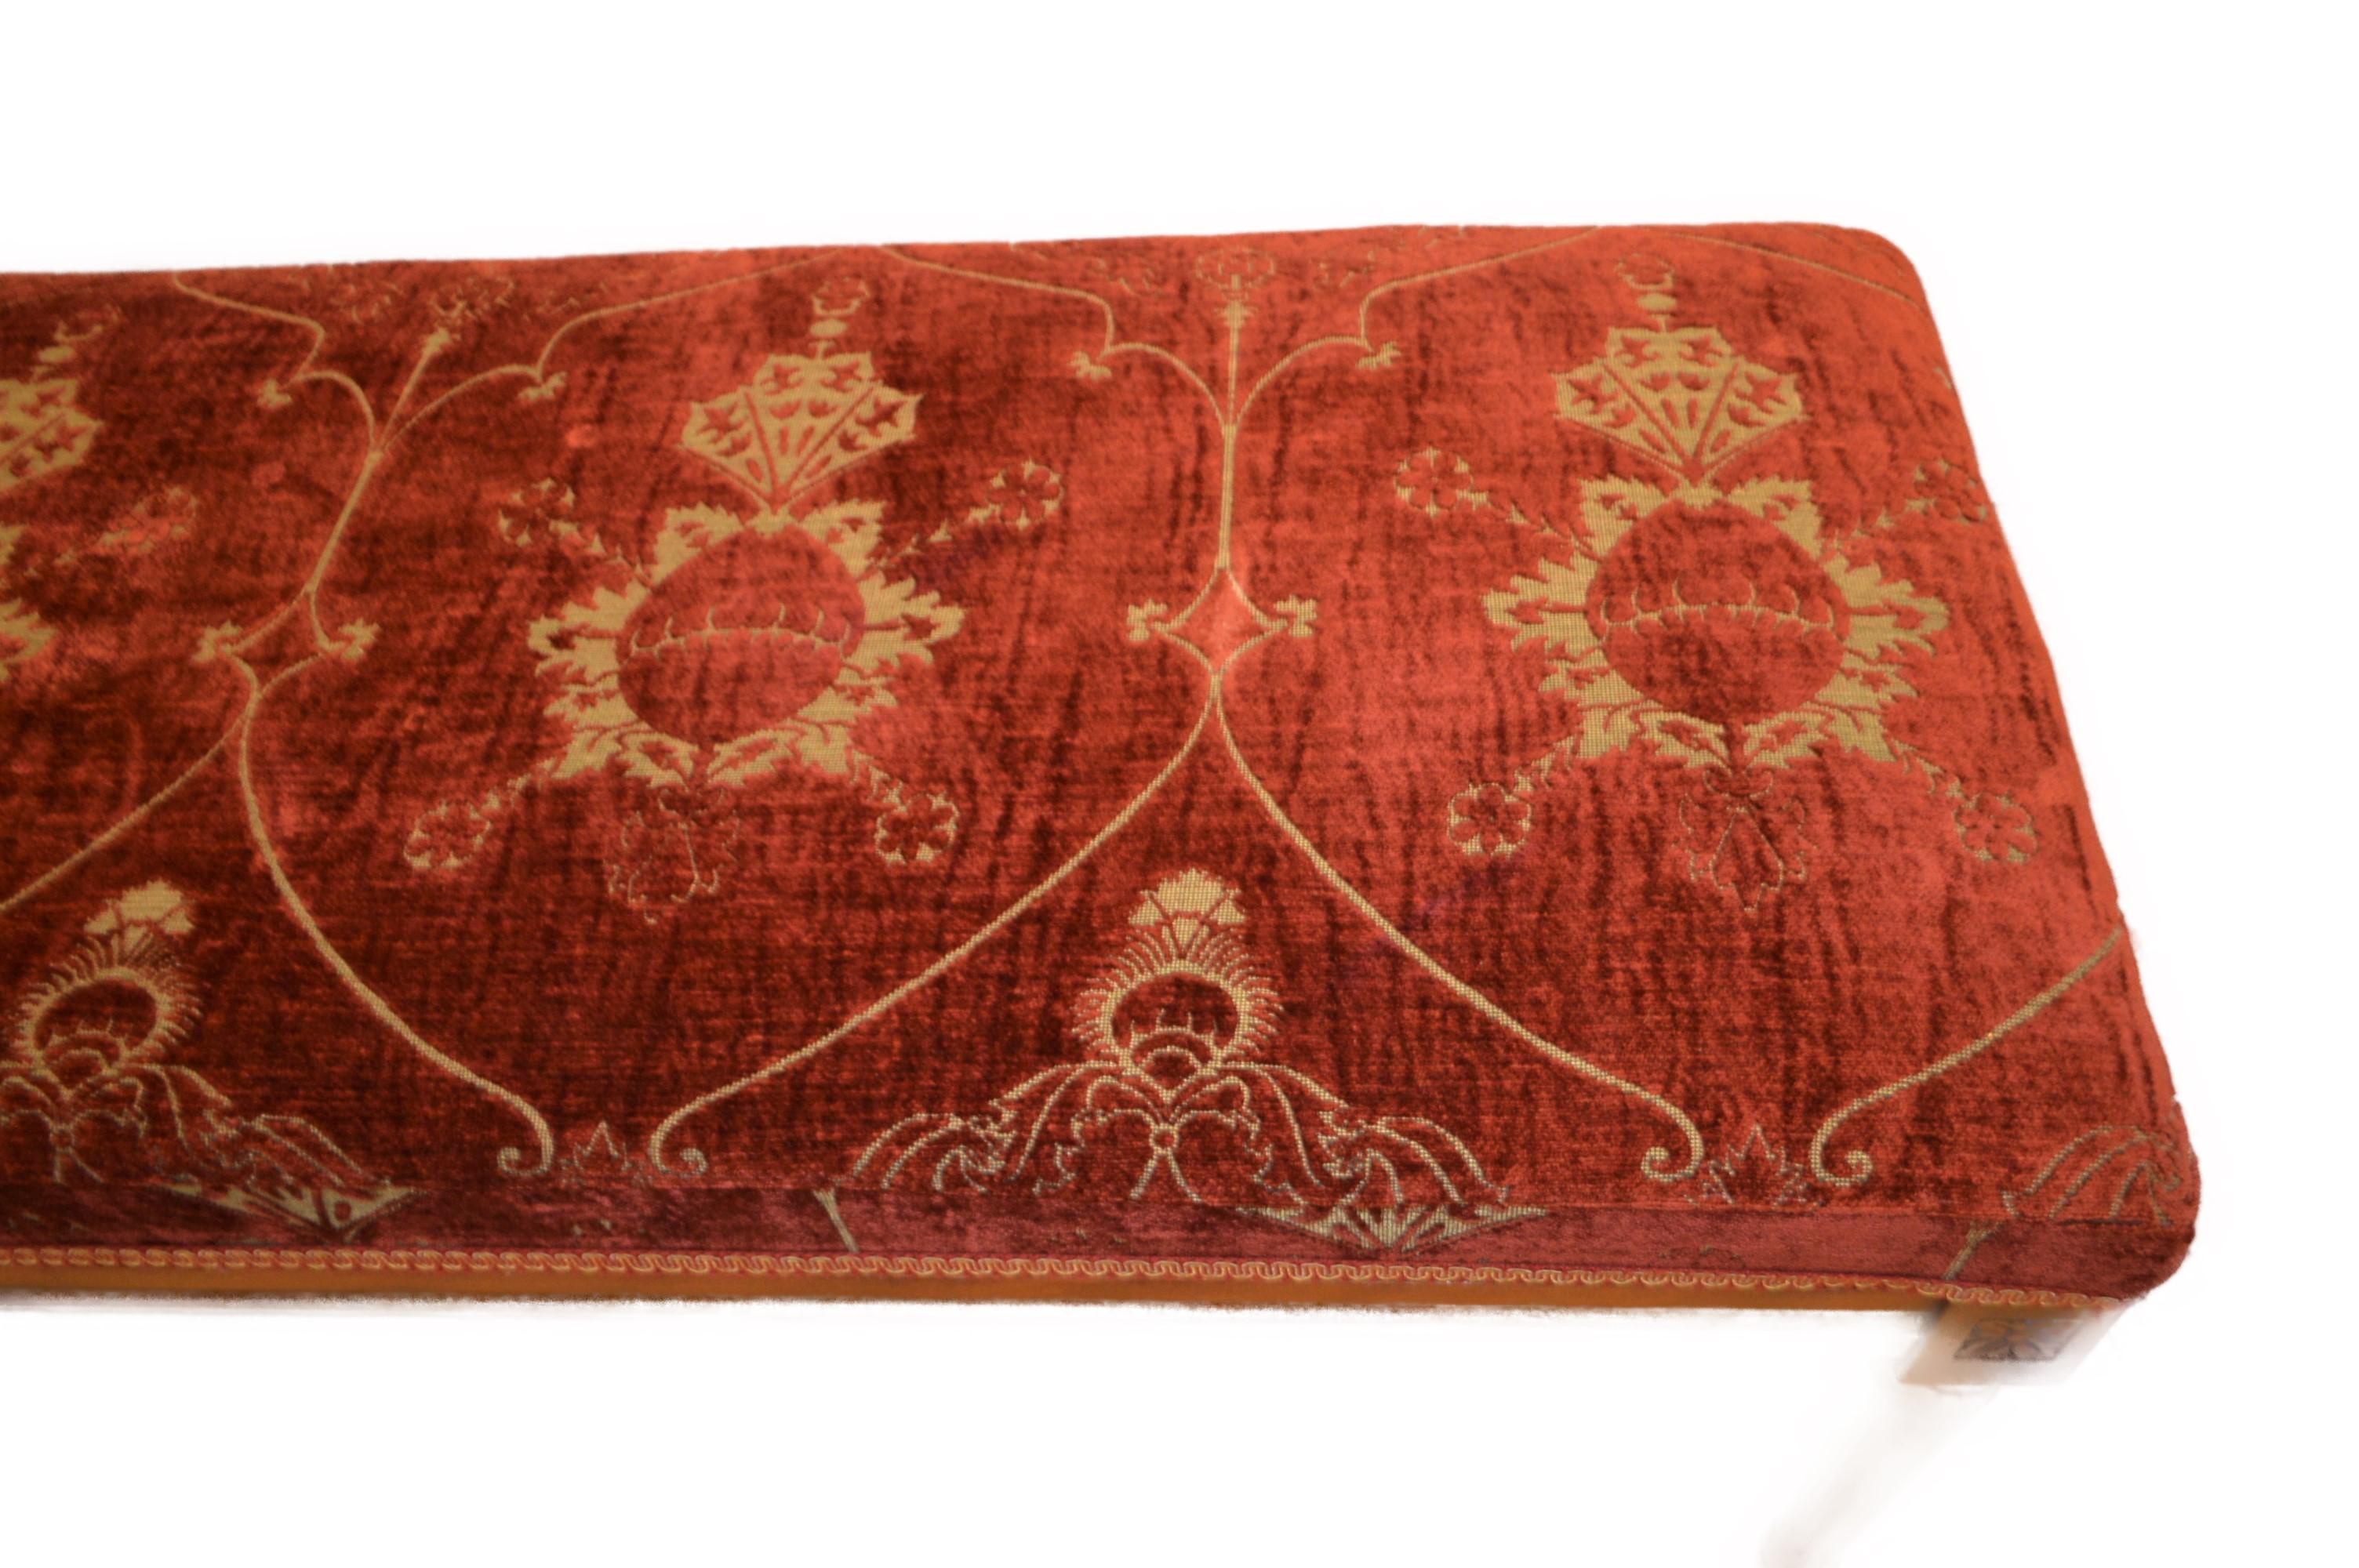 Italian Louis XVI style bench upholstered with a red antique chenille fabric.